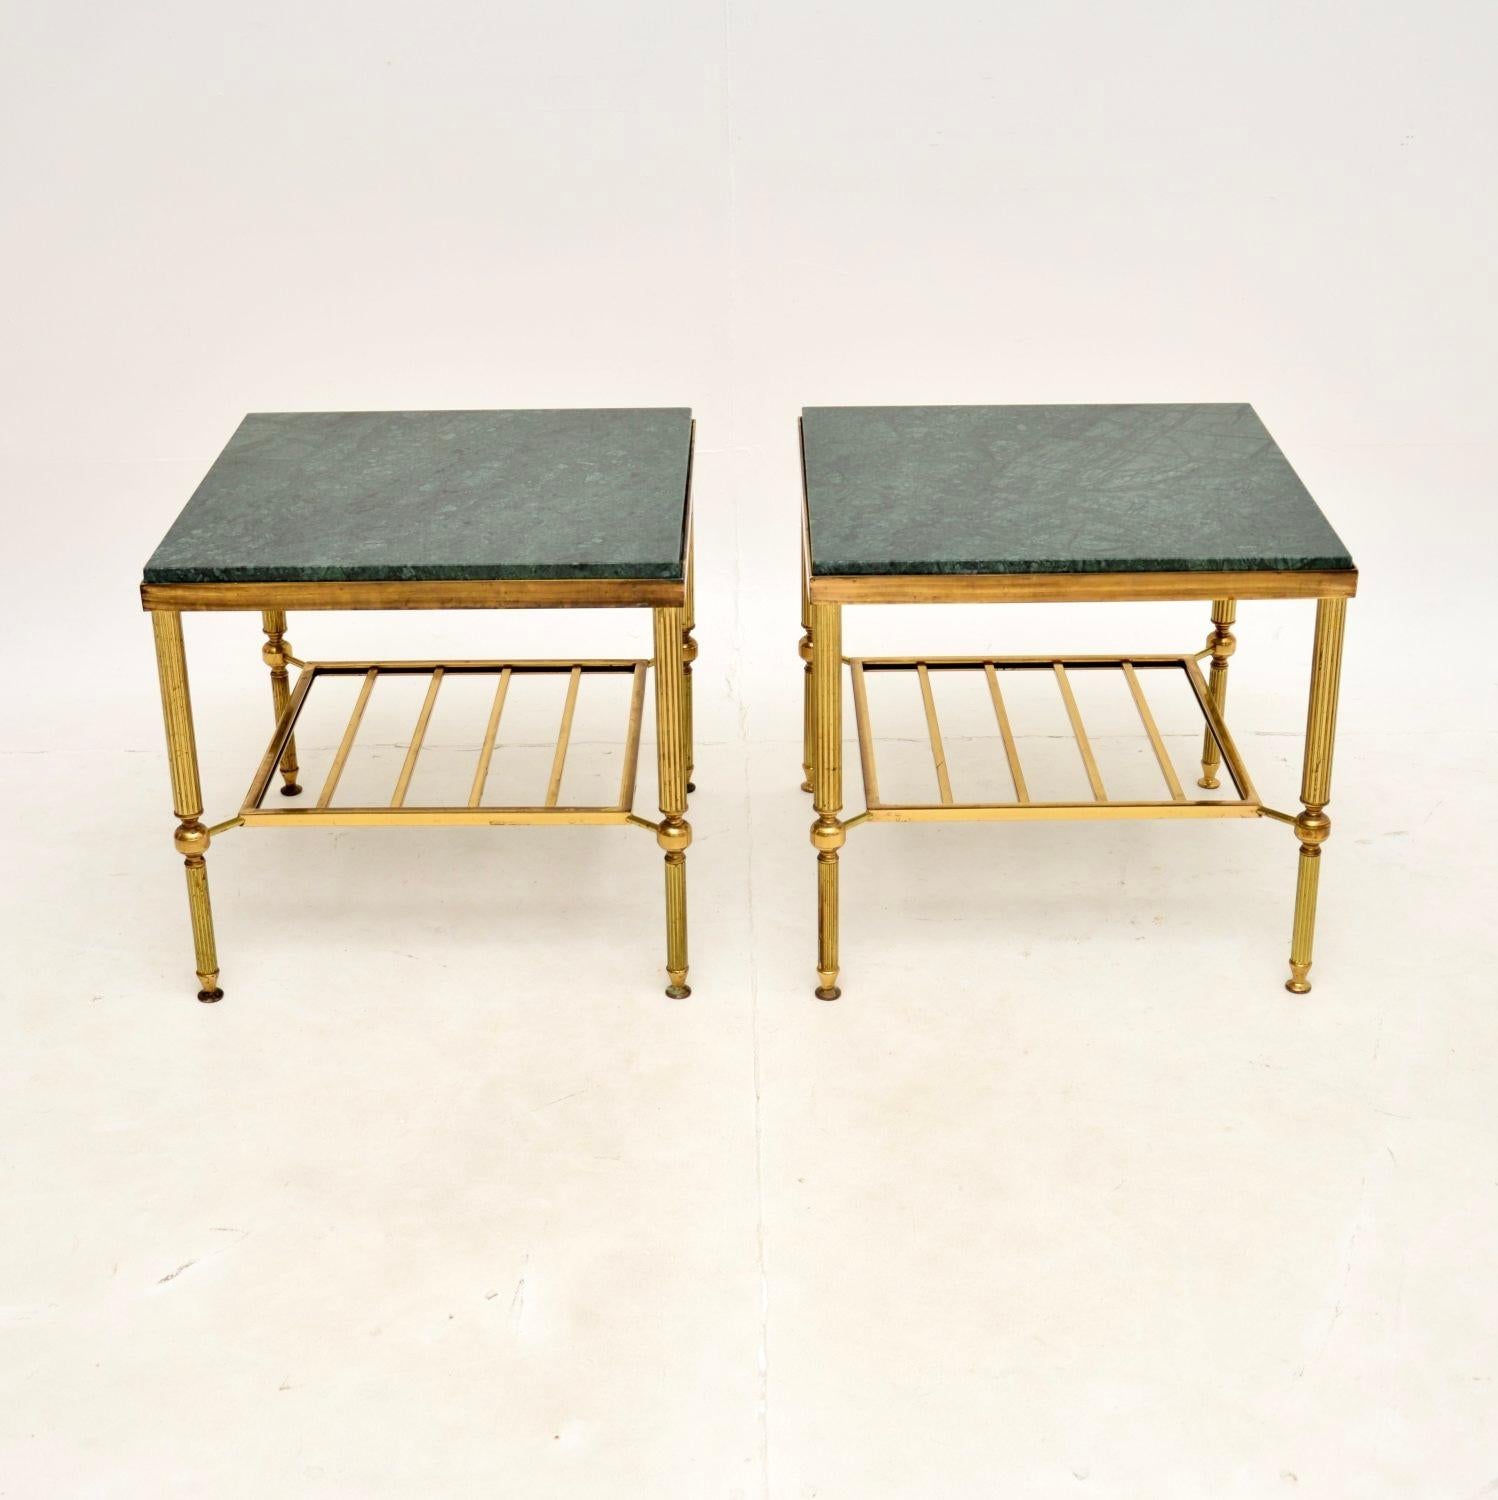 A stylish and extremely well made pair of vintage French brass and marble side tables. They were made in France and date from around the 1960-70’s.

The quality is fantastic, the solid brass frames are beautifully designed with fluted legs and a